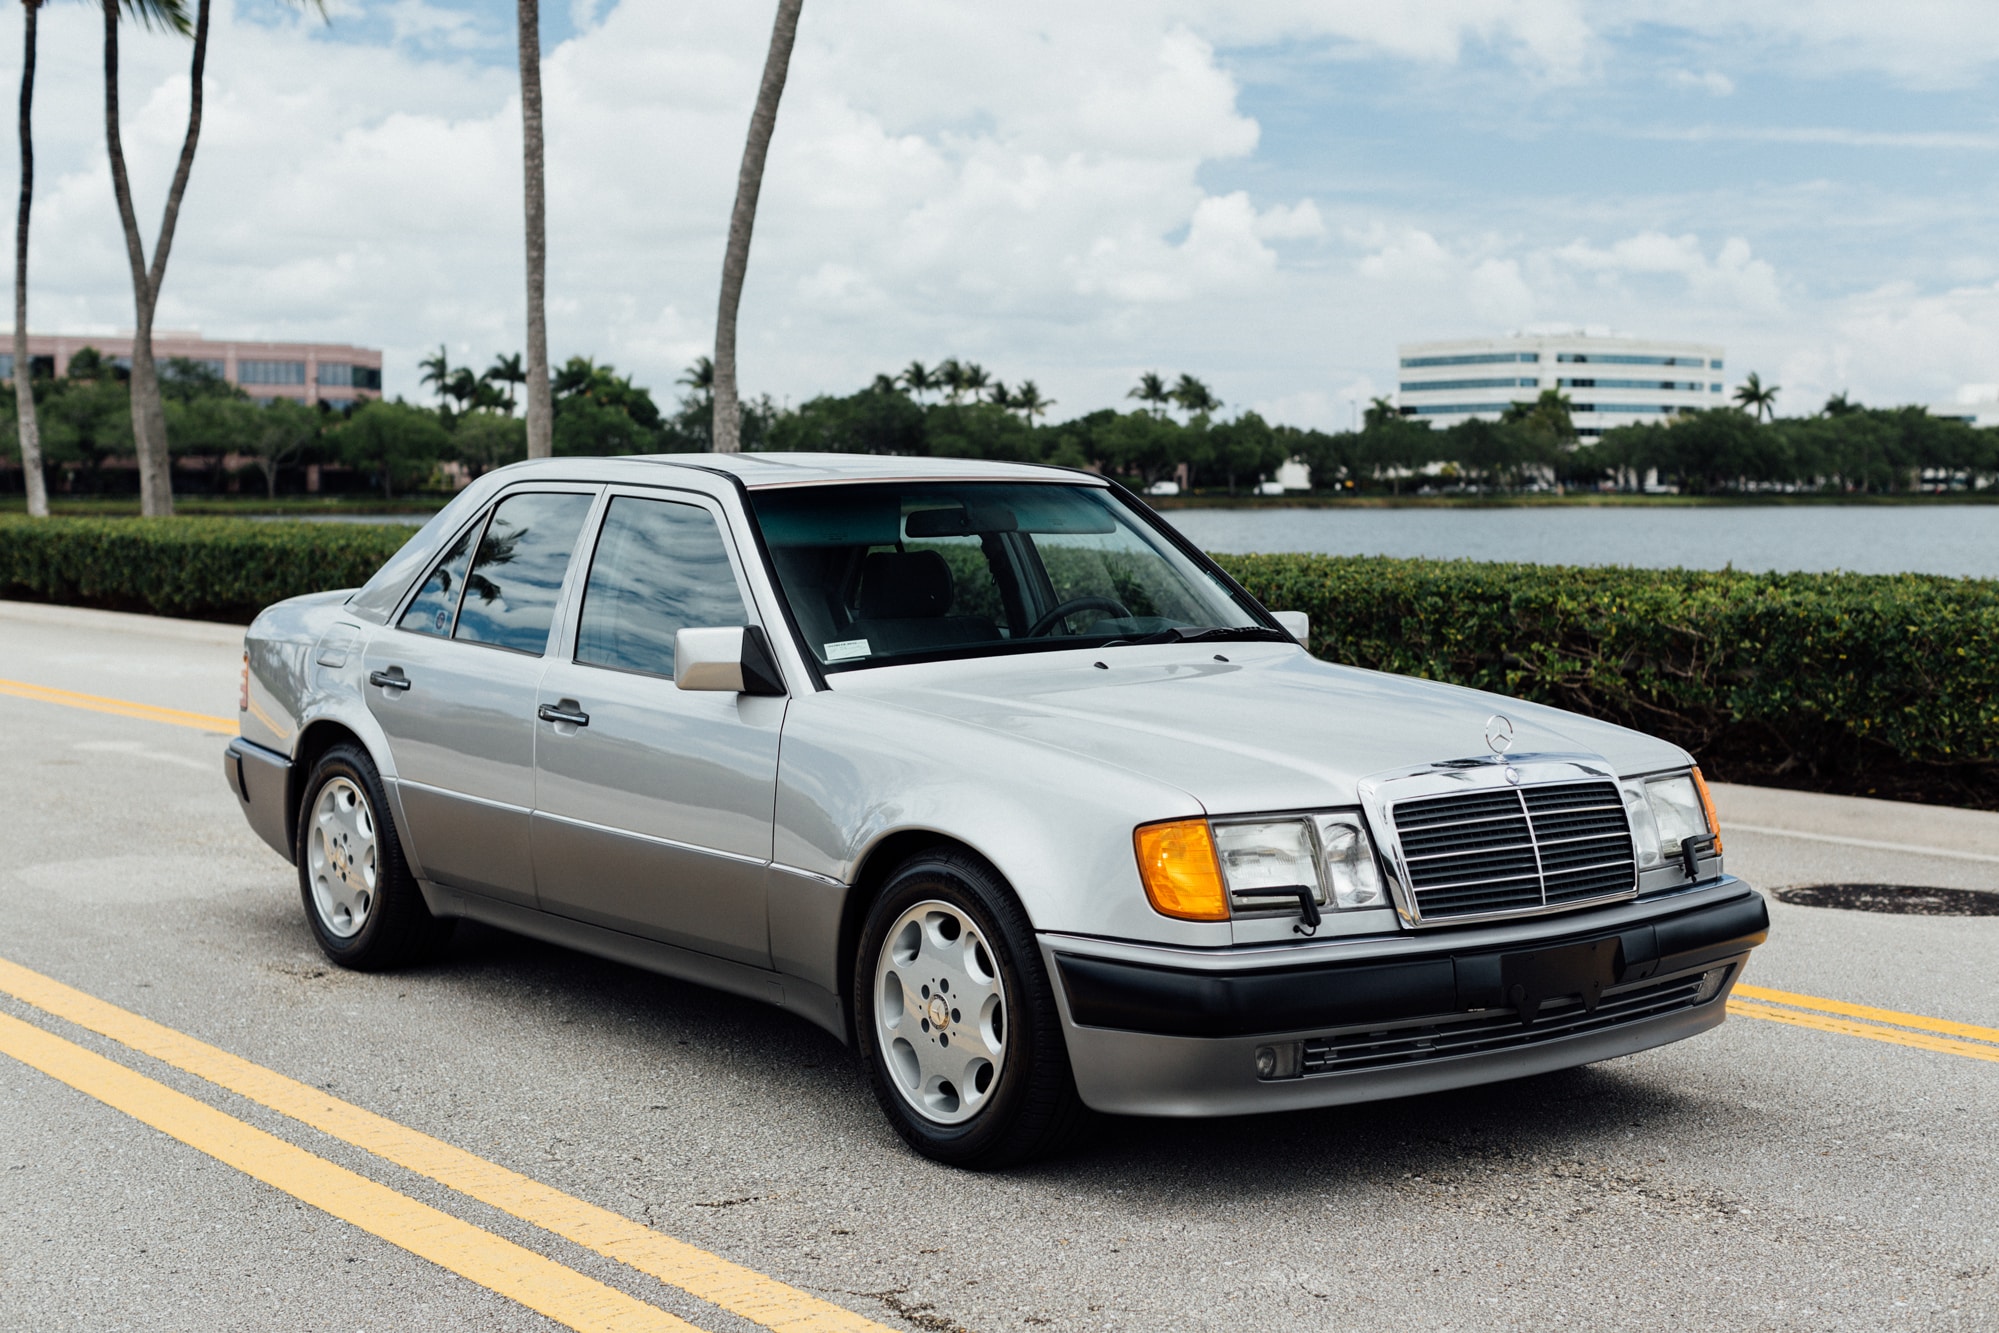 1992 Mercedes-Benz 500E (W124) | Stunning Condition Inside Out | Beautifully Kept | 23 Years of Documentation $65000 in service | Fully Documented History | Turn Key